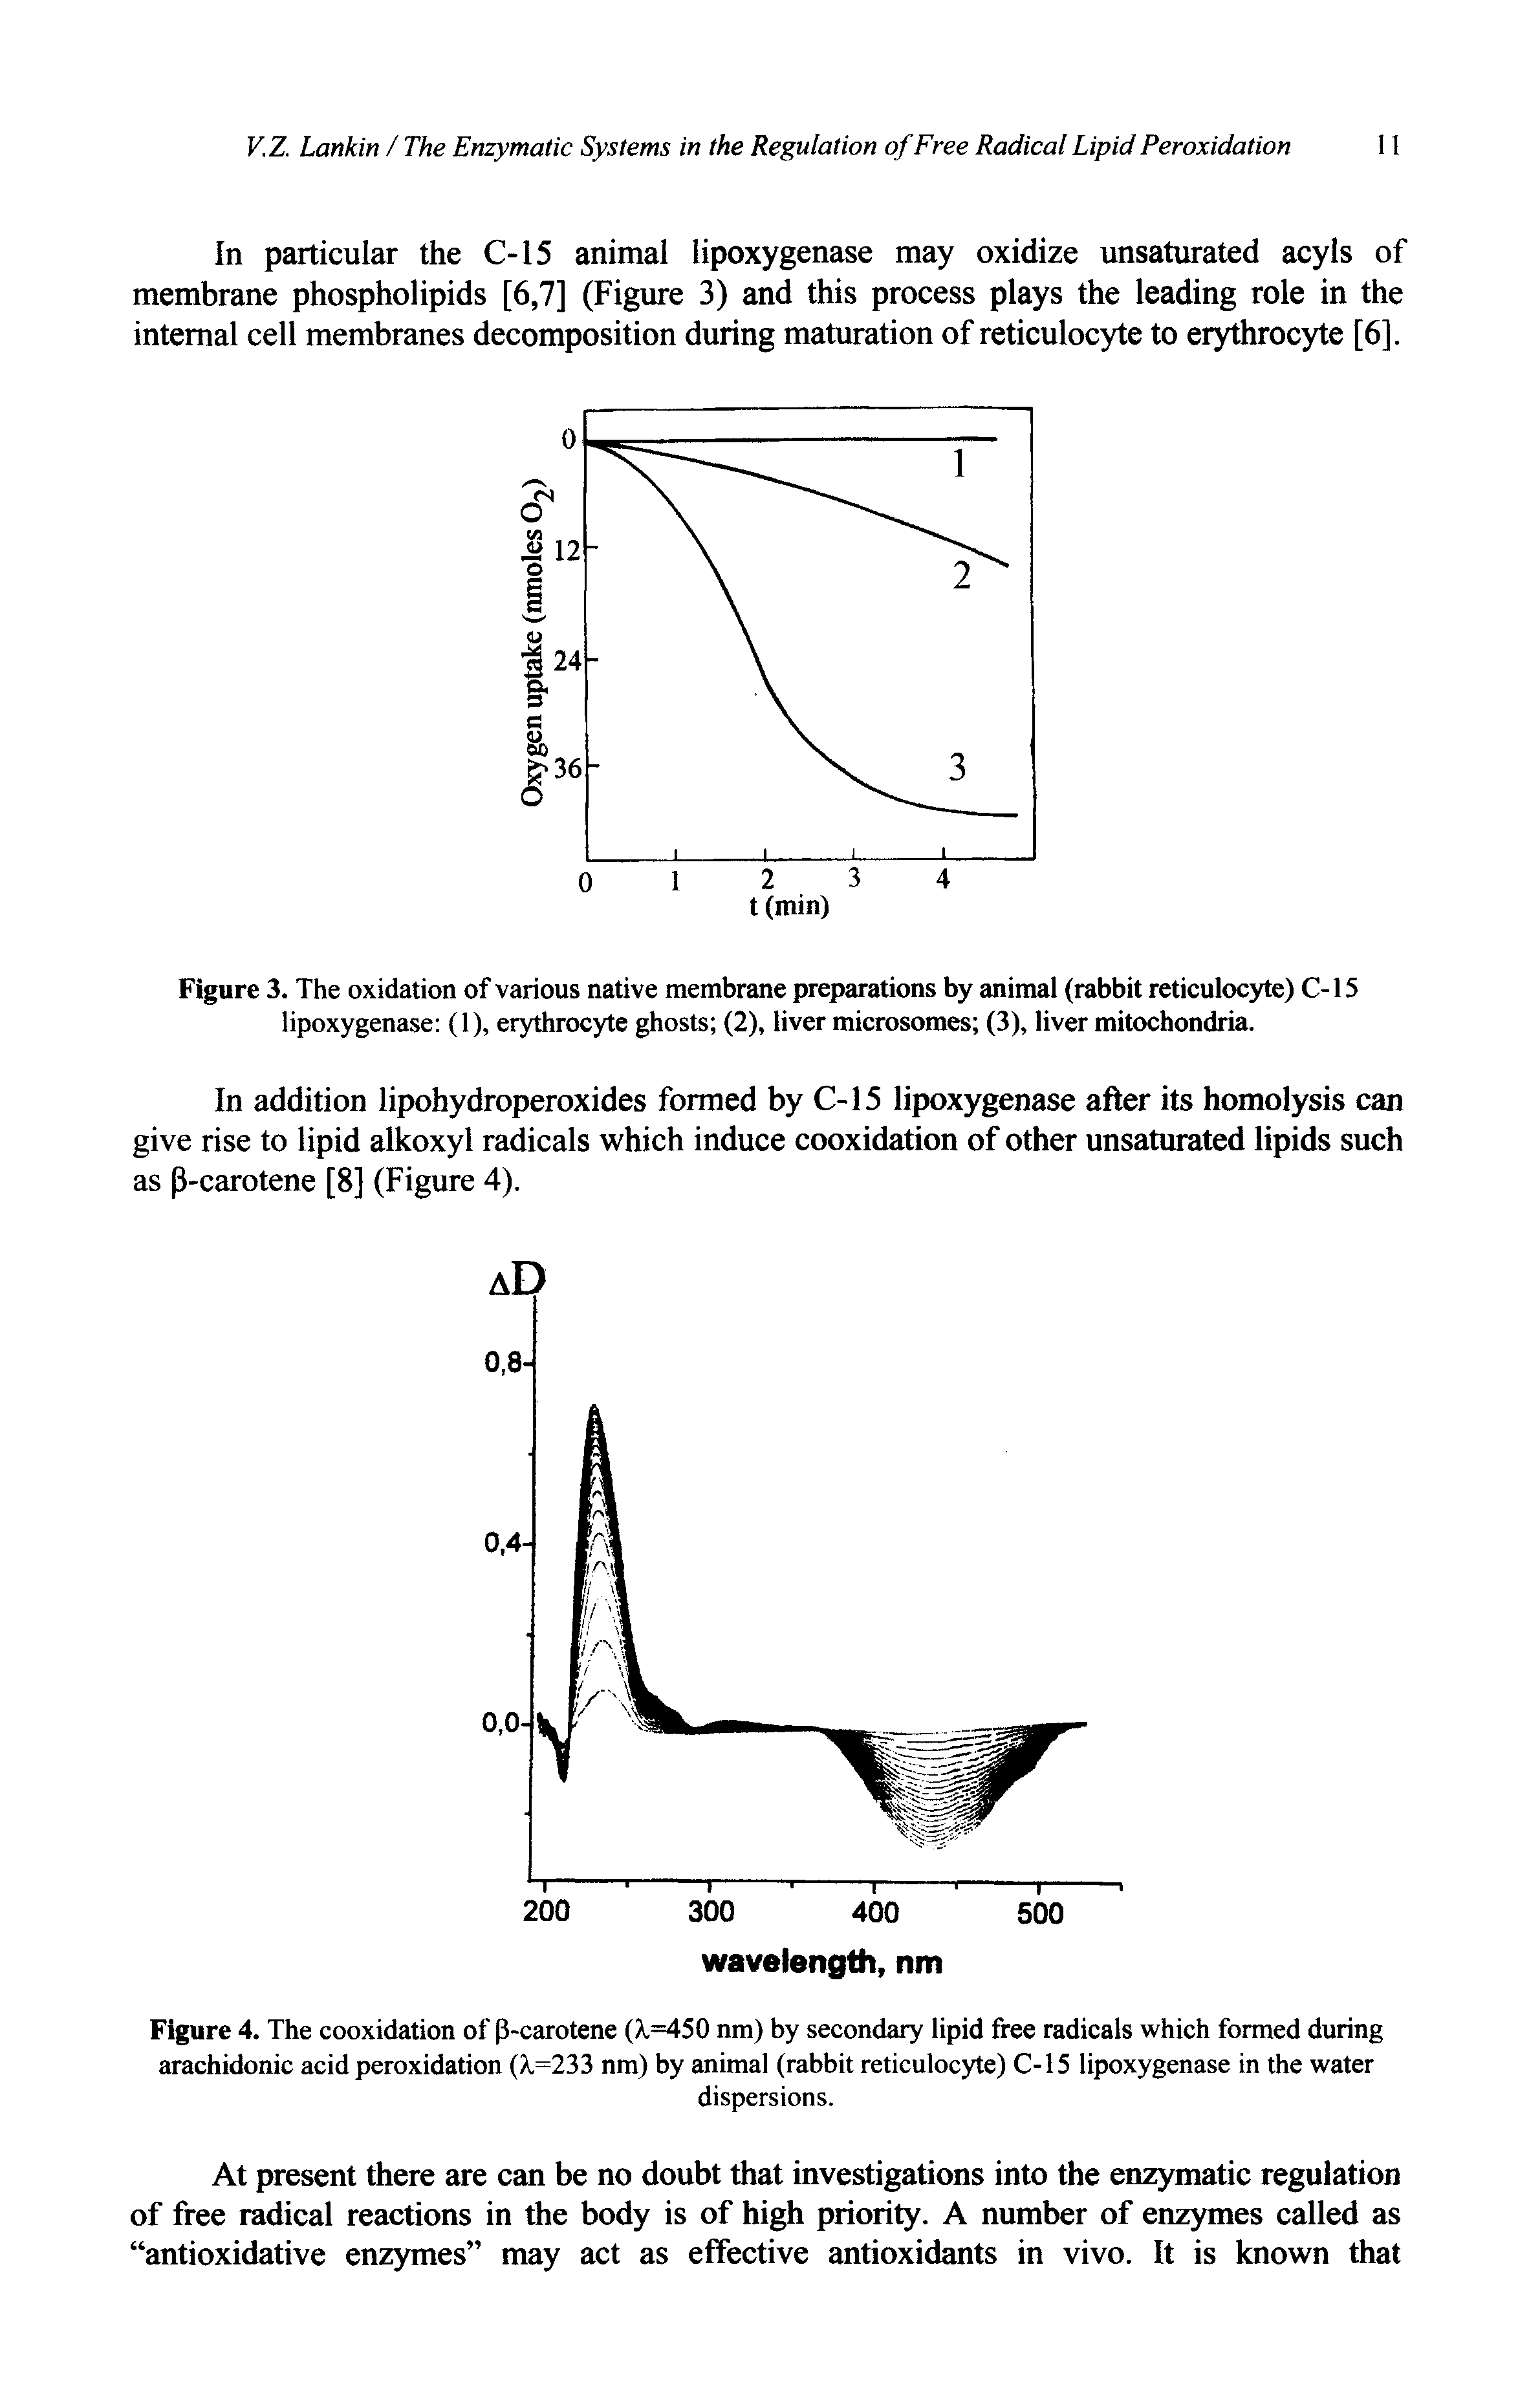 Figure 4, The cooxidation of P-carotene (X.=450 nm) by secondary lipid free radicals which formed during arachidonic acid peroxidation (A,=233 nm) by animal (rabbit reticulocyte) C-15 lipoxygenase in the water...